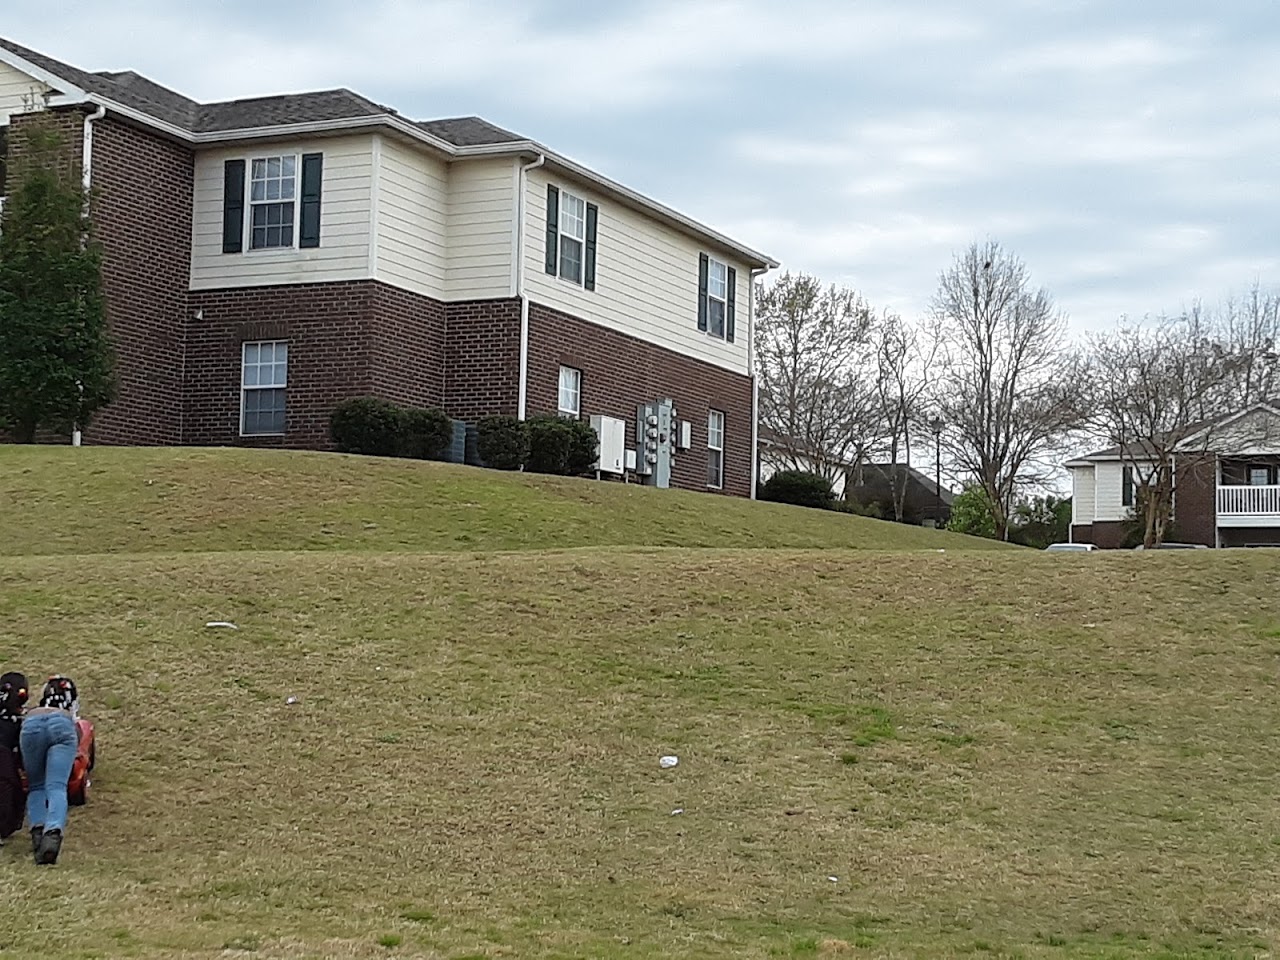 Photo of BRENTWOOD LANDING APTS II. Affordable housing located at 549 COVERED BRIDGE PKWY PRATTVILLE, AL 36066